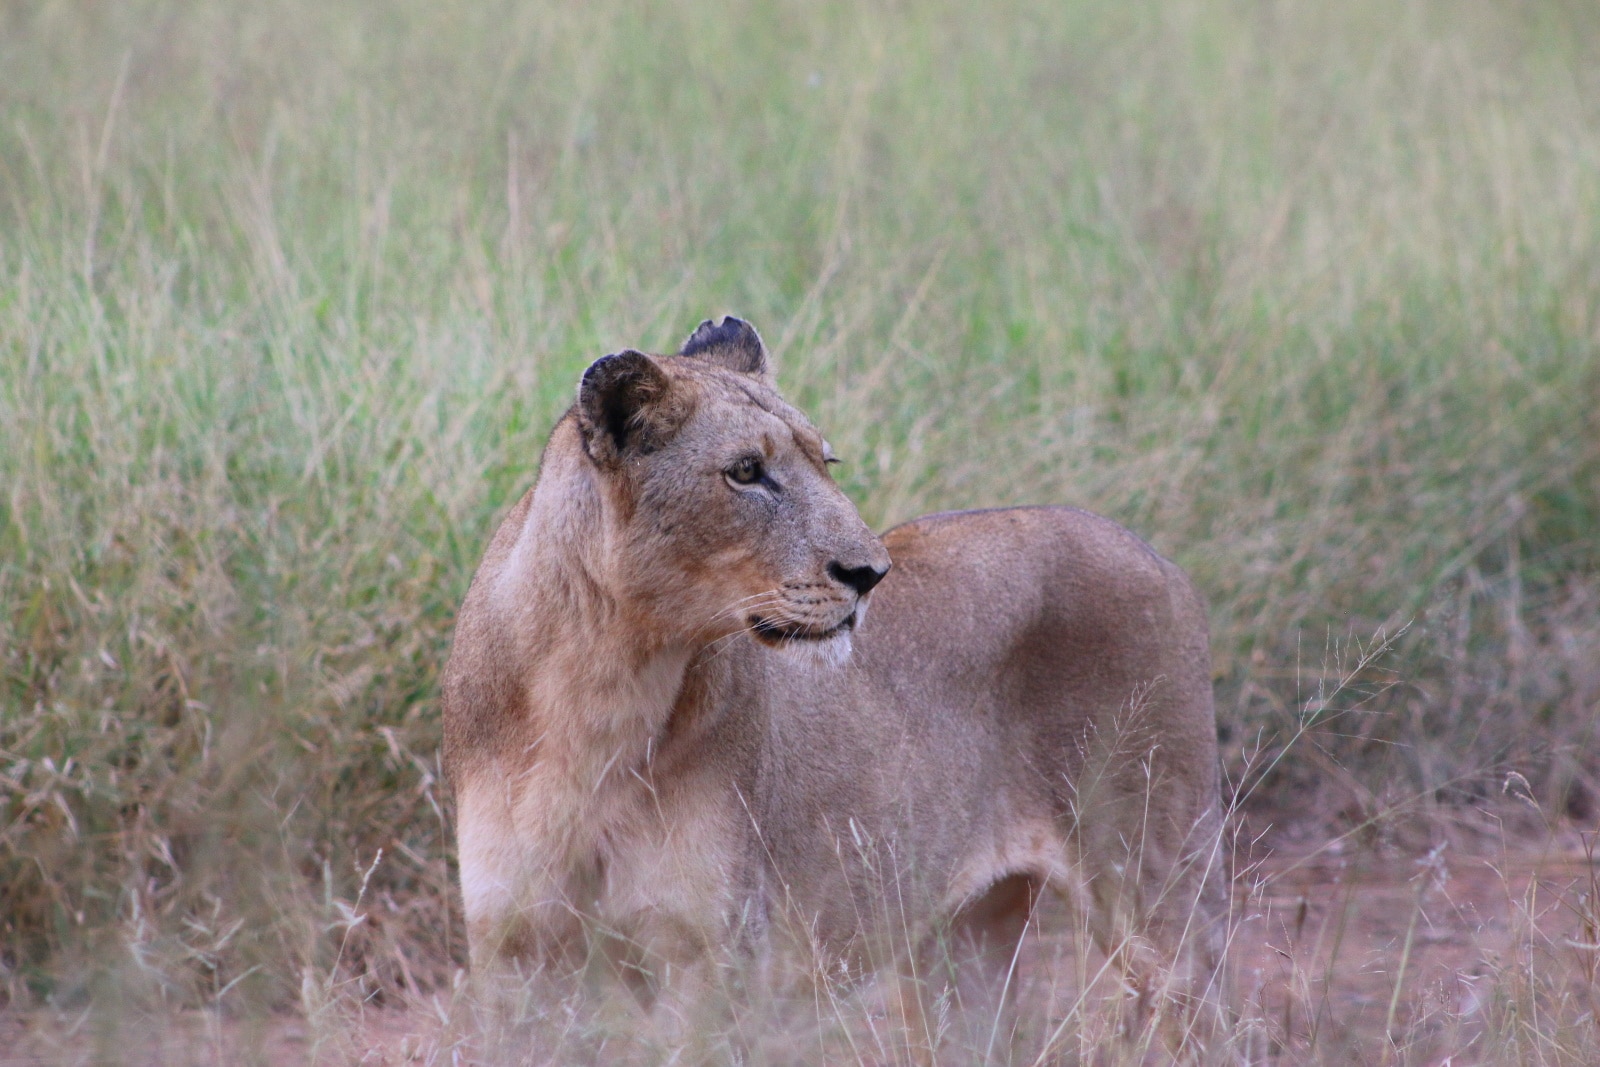 Lioness in Mana Pools